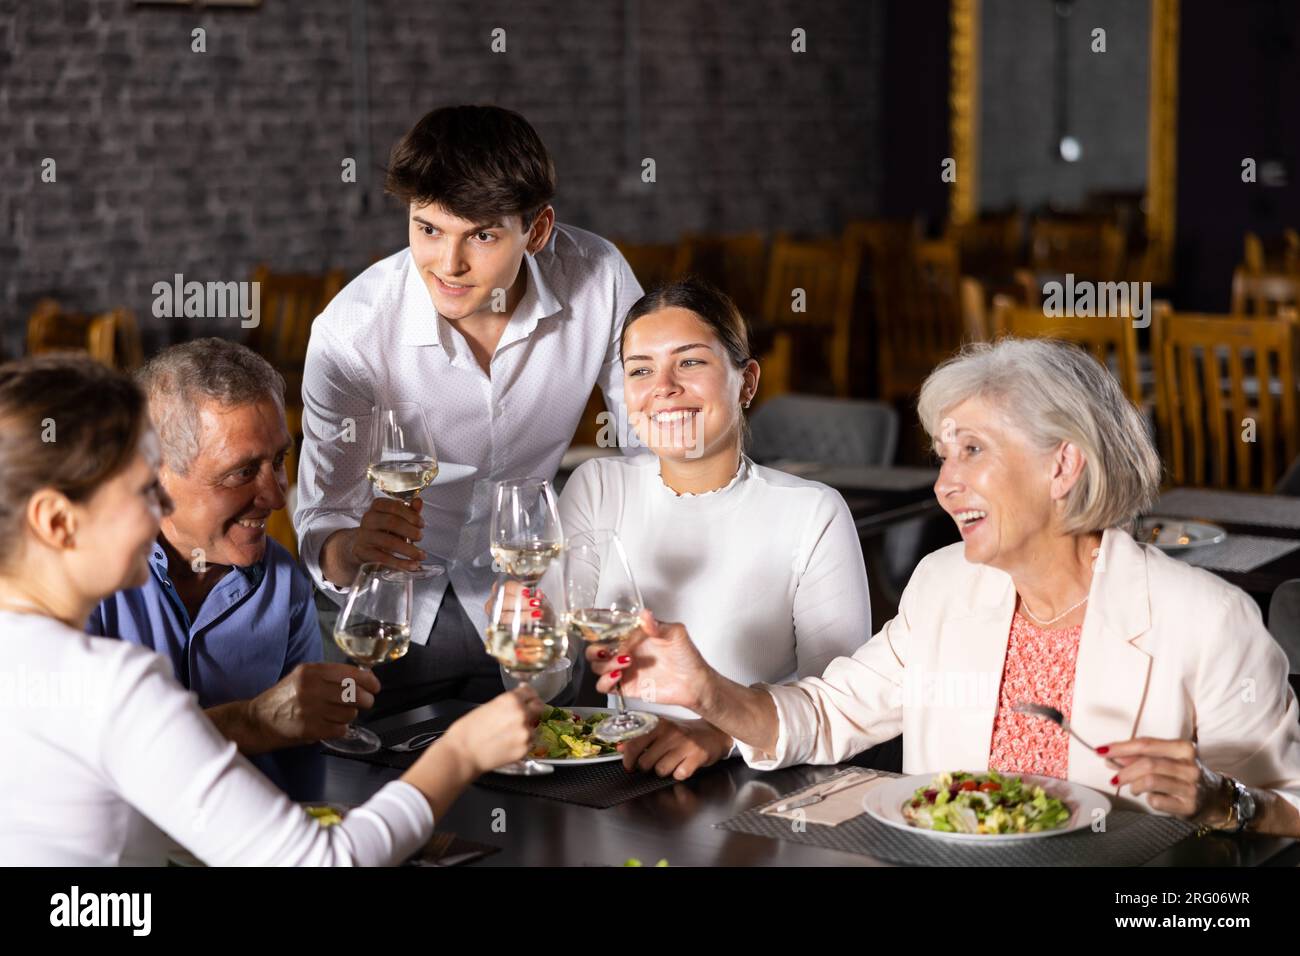 Large family, company of spouses in restaurant, eat, celebrate important event, communicate. Stock Photo